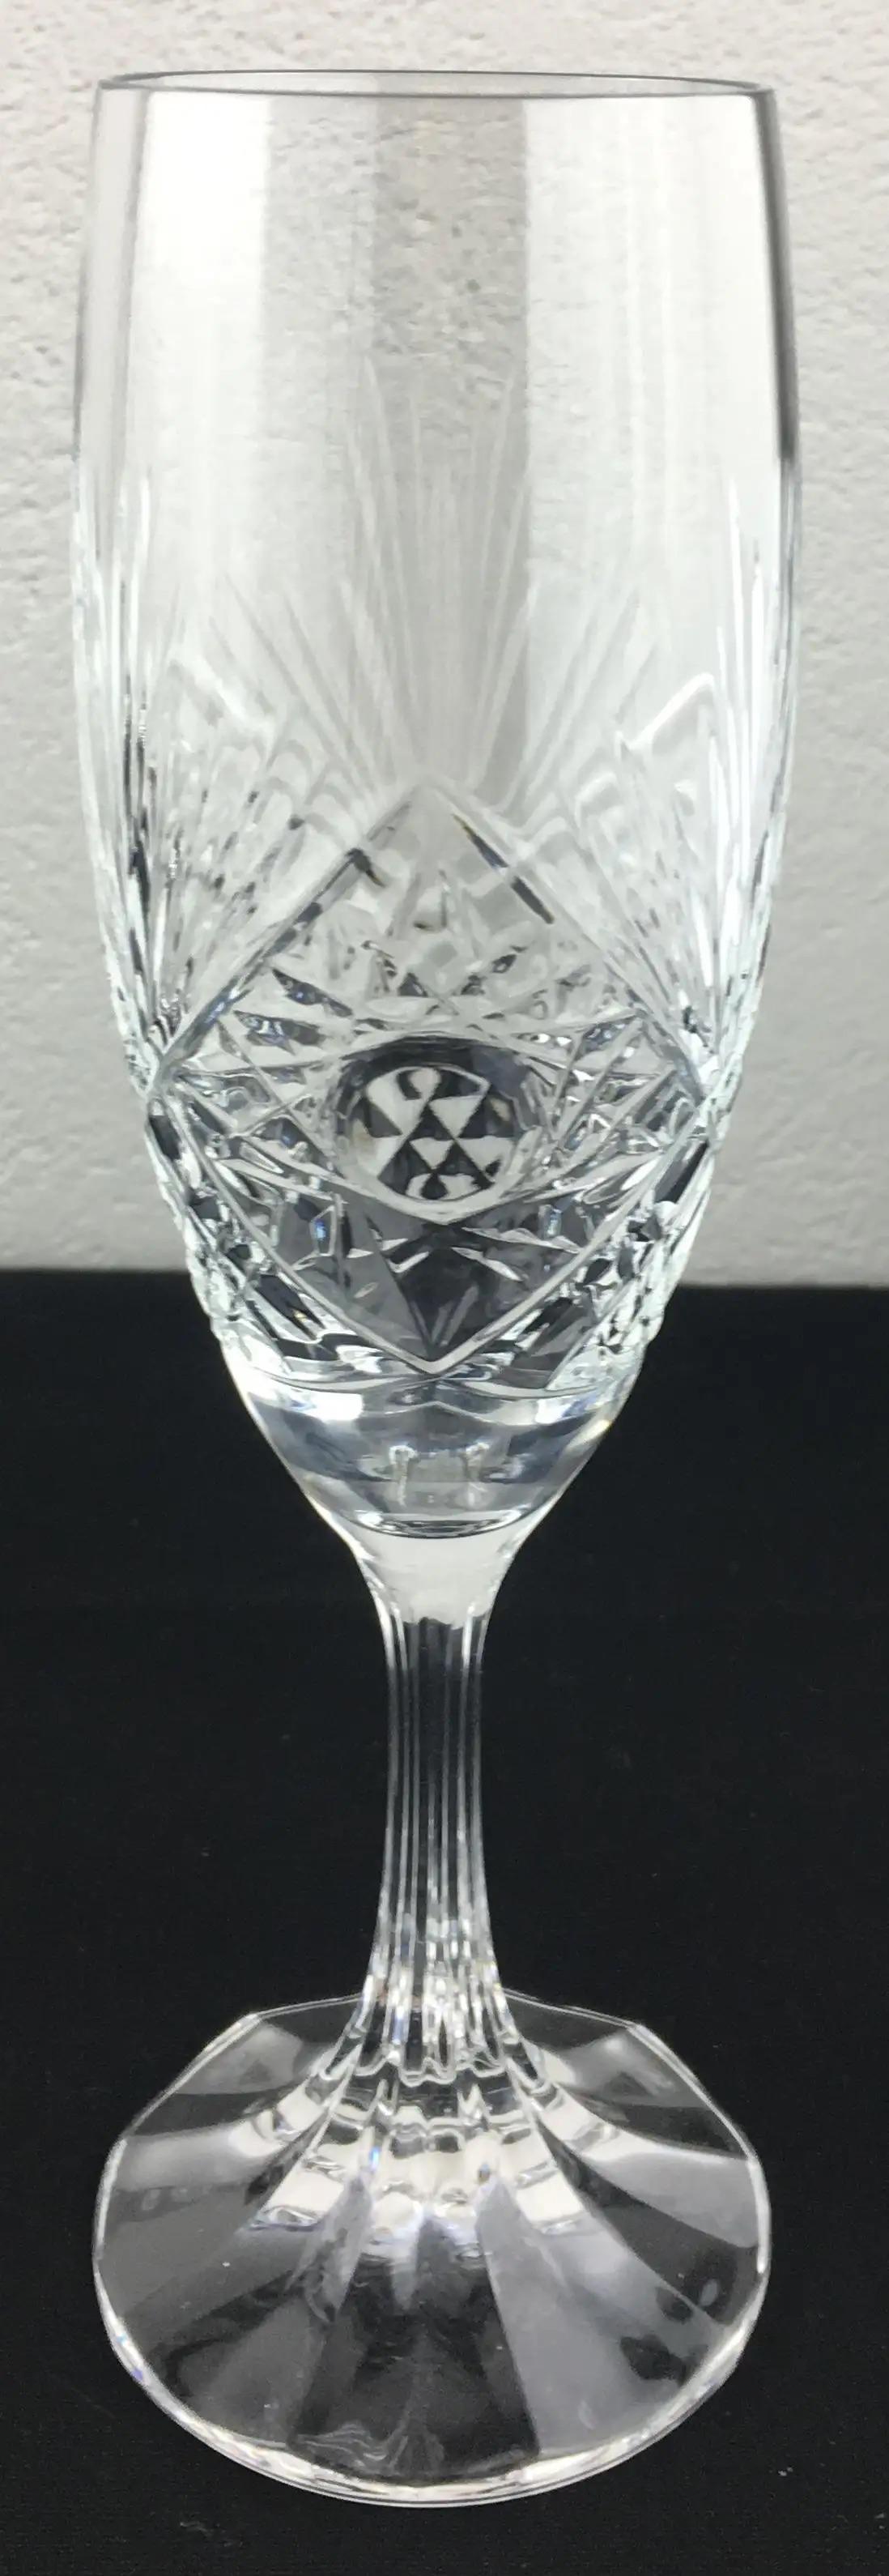 Baccarat Crystal Champagne Flutes, Set of 8 In Good Condition For Sale In Miami, FL